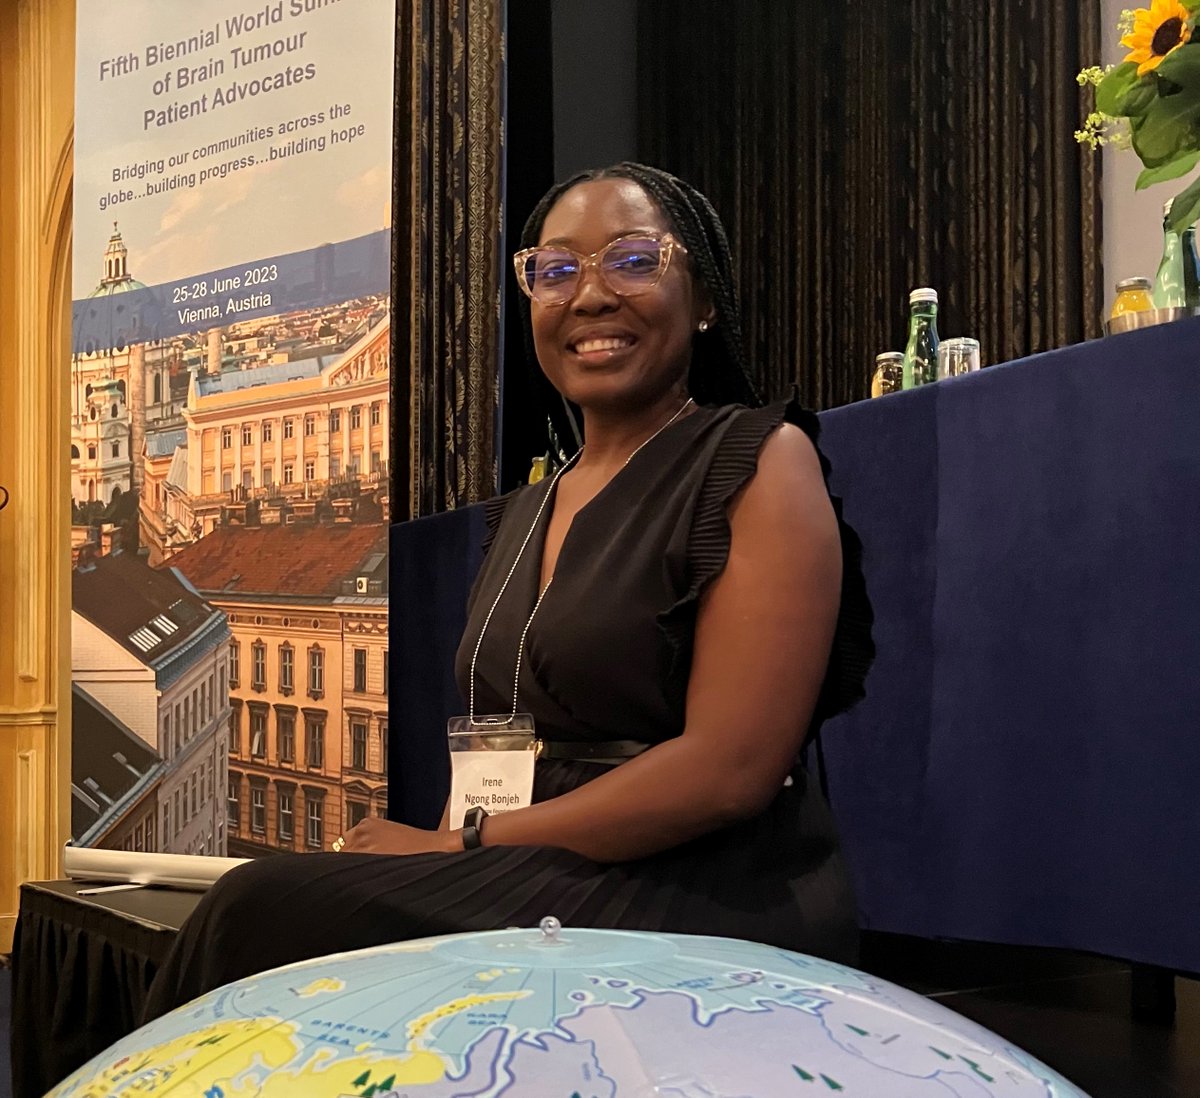 The #IBTASummit2023 has been a great chance to meet old friends like Irene Ngong from Cameroon and new friends like the Jay C Trust. What an honour to be representing @braintumourrsch for the fifth time at this summit. Huge congratulations to @theibta for all this has achieved.